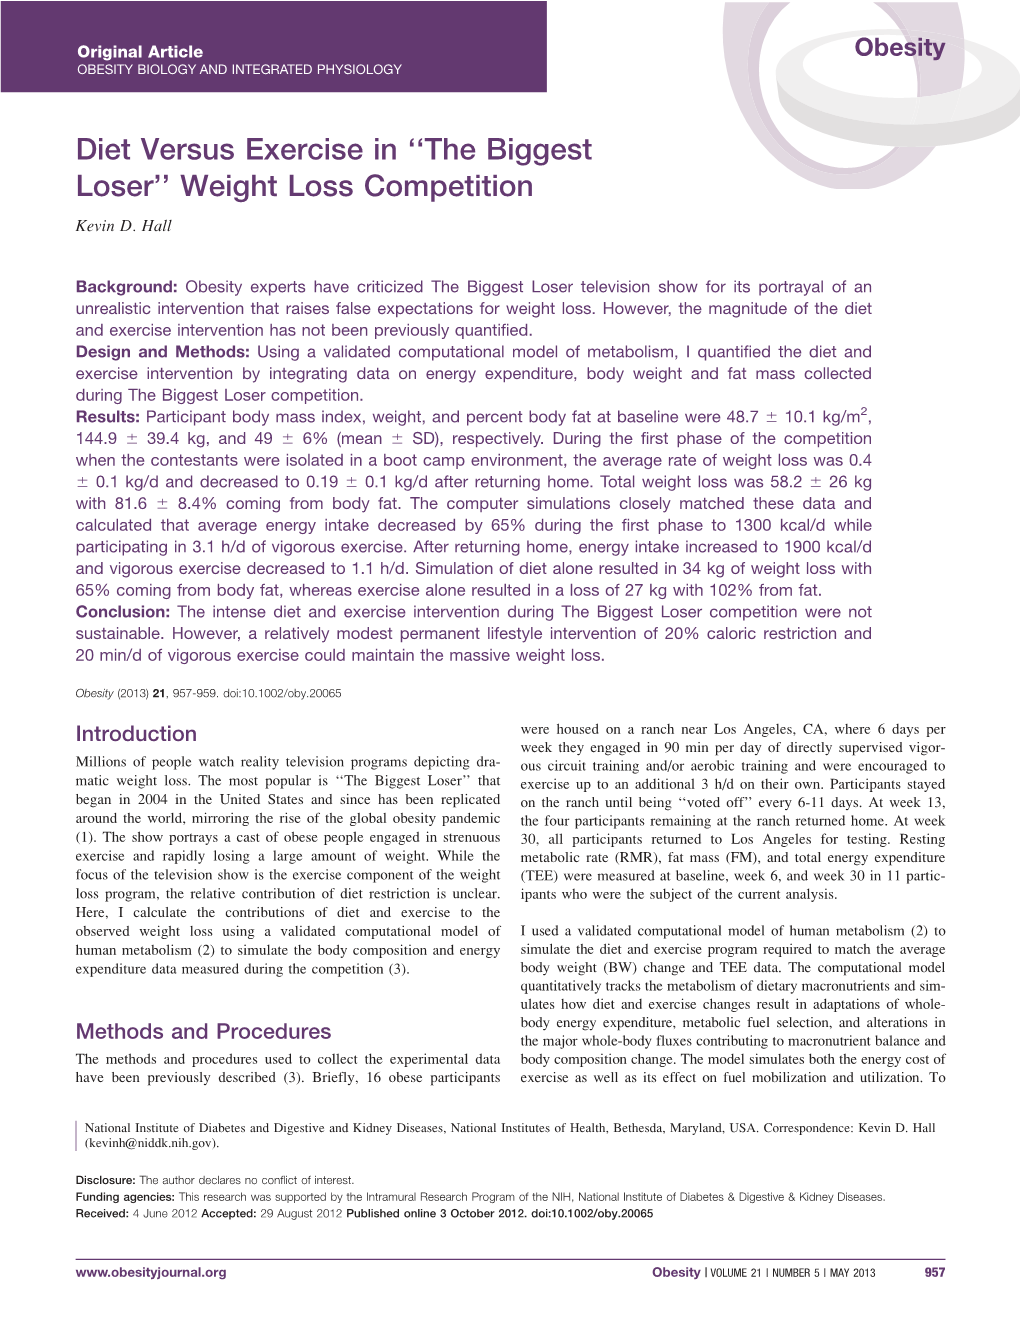 Diet Versus Exercise in the Biggest Loser Weight Loss Competition